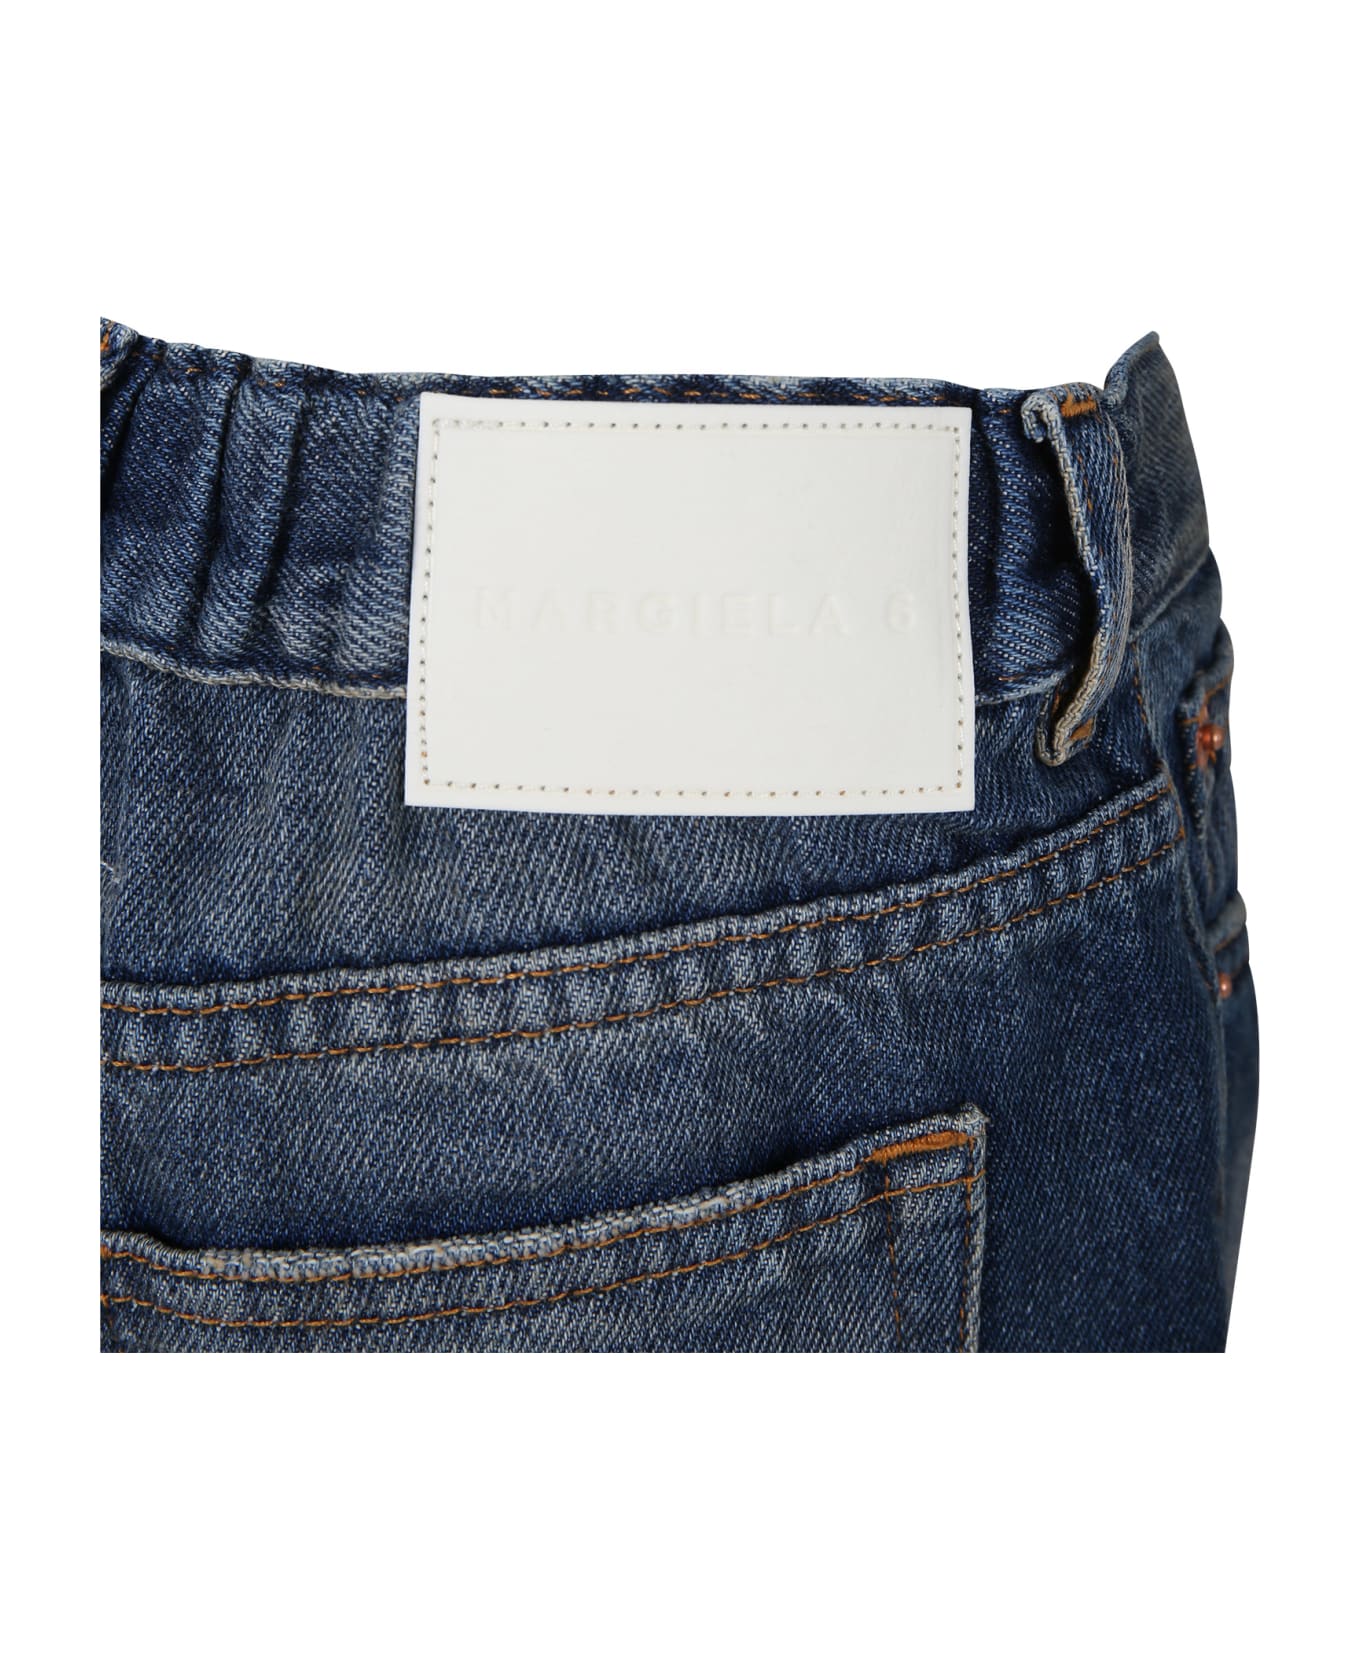 MM6 Maison Margiela Denim Jeans For Girl With Contrasting Stitching - Denim